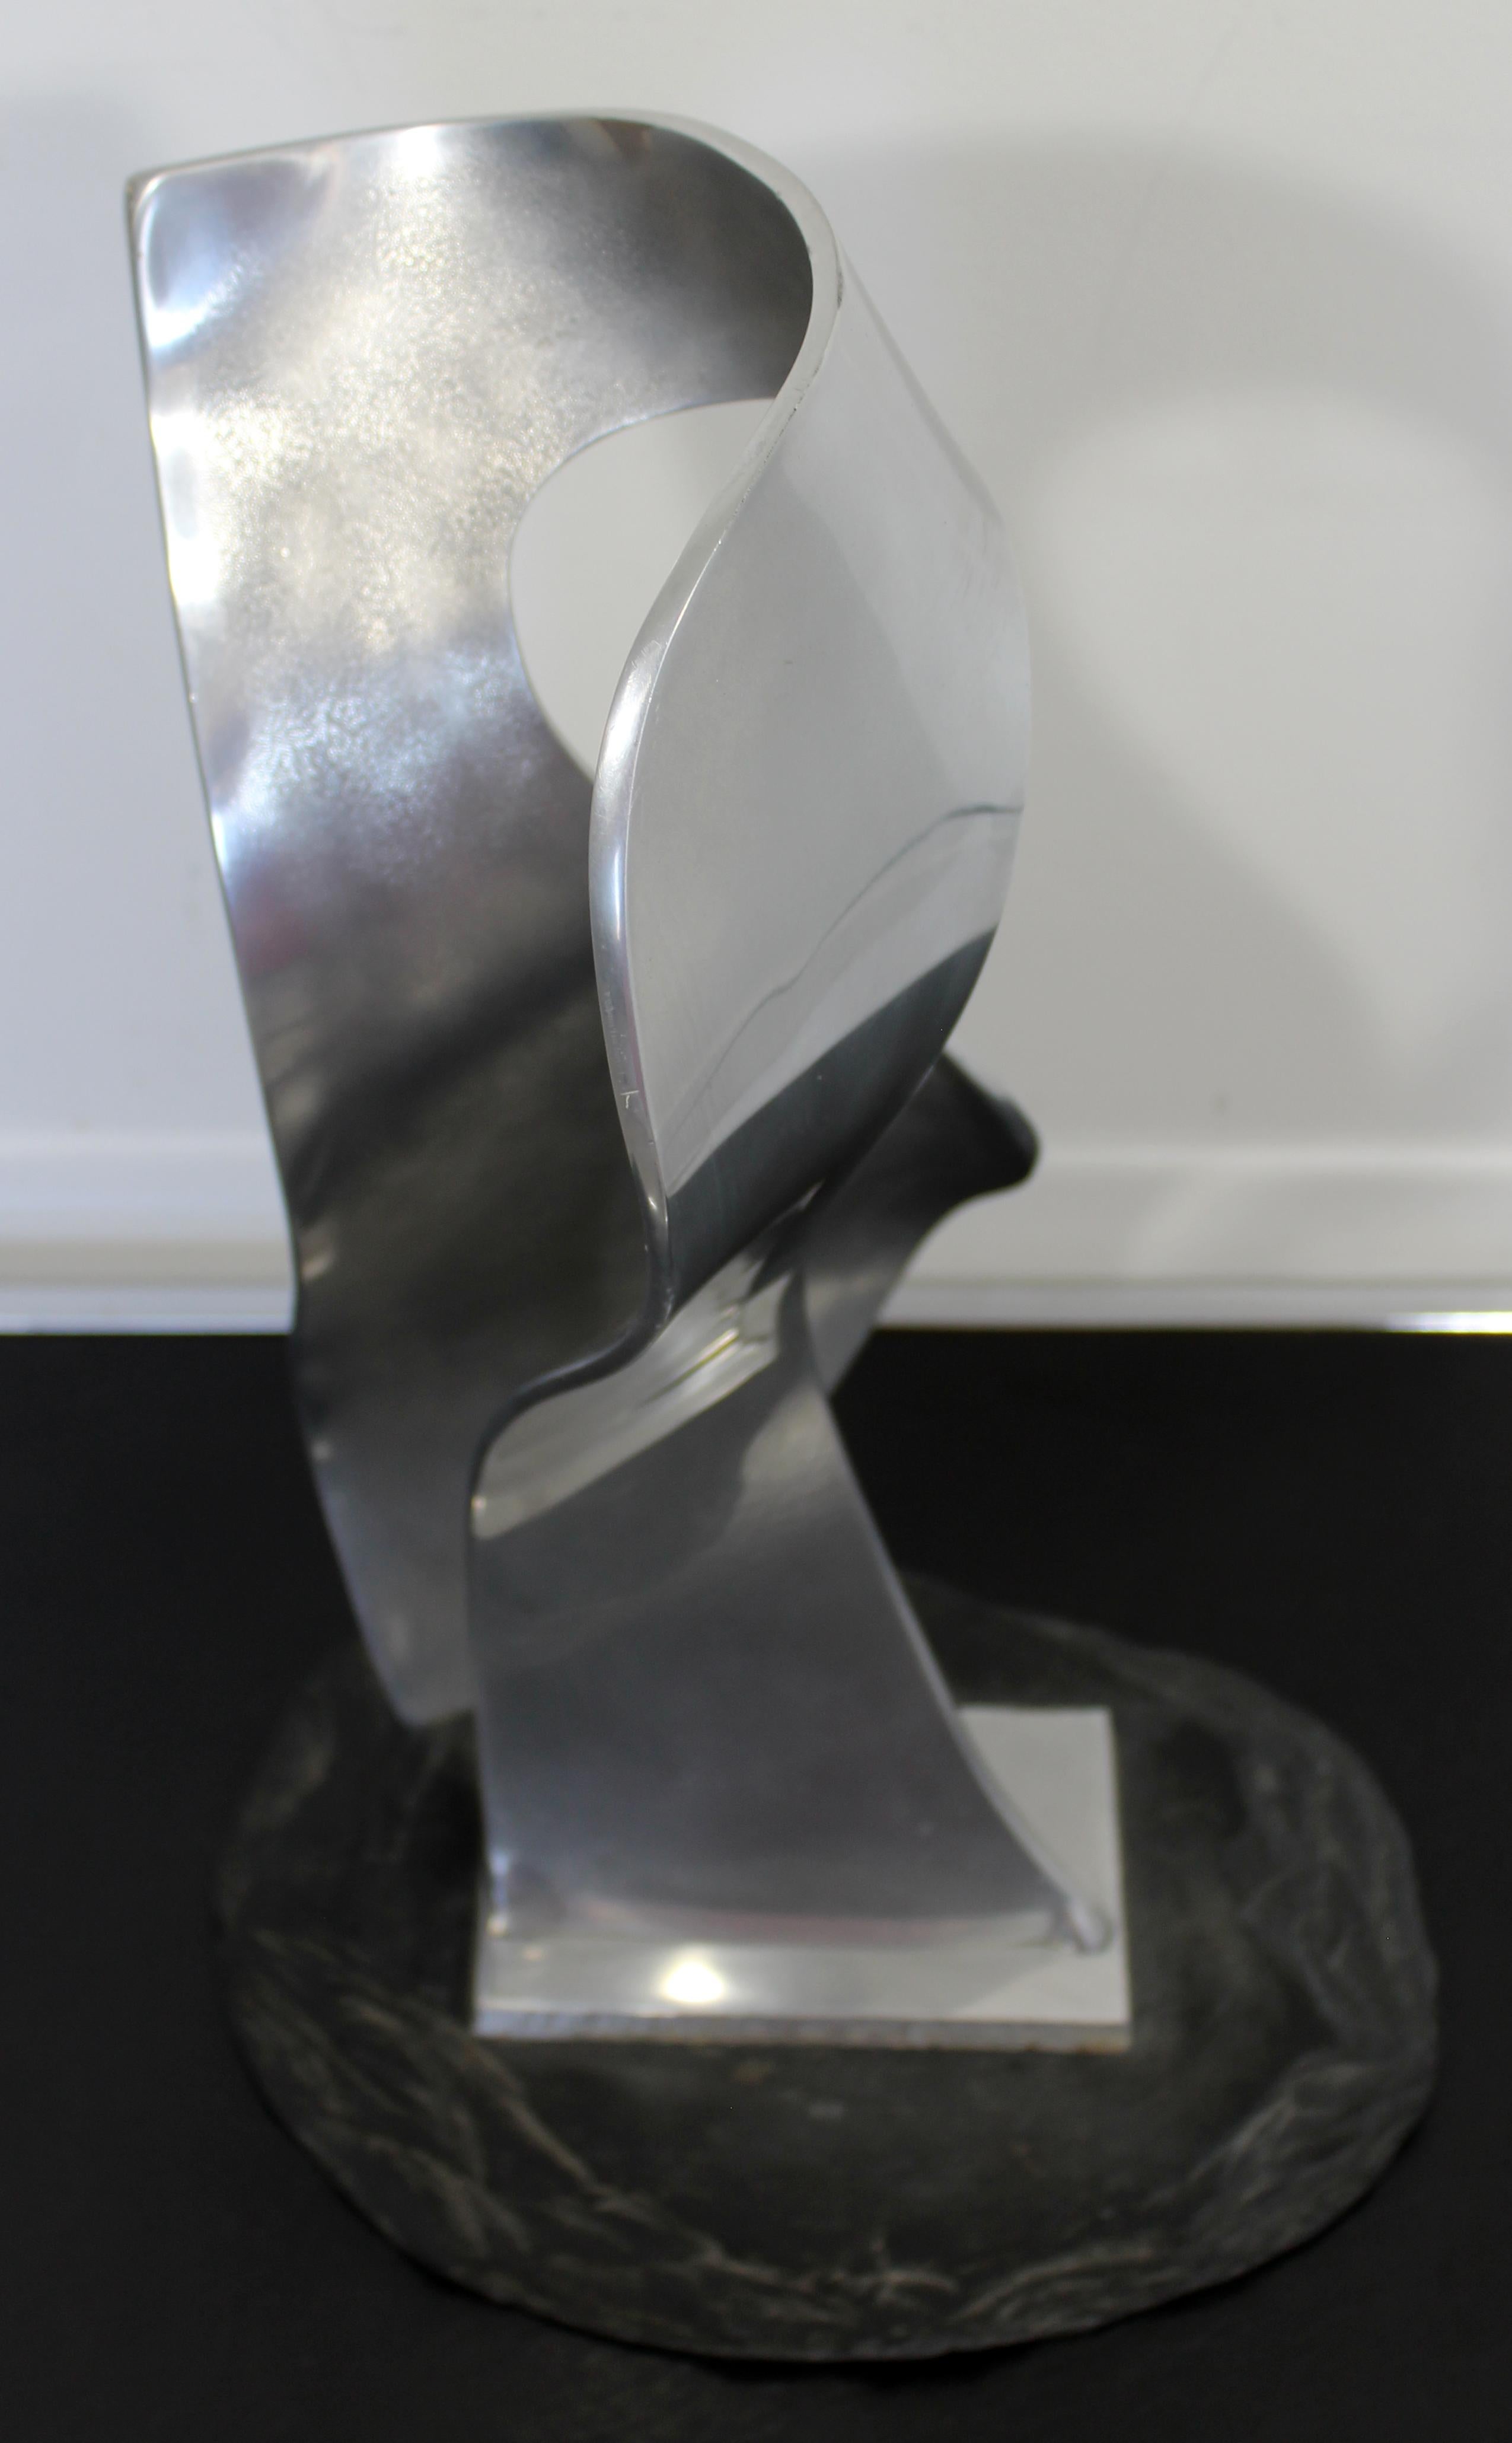 For your consideration is an outstanding abstract aluminum sculpture titled 